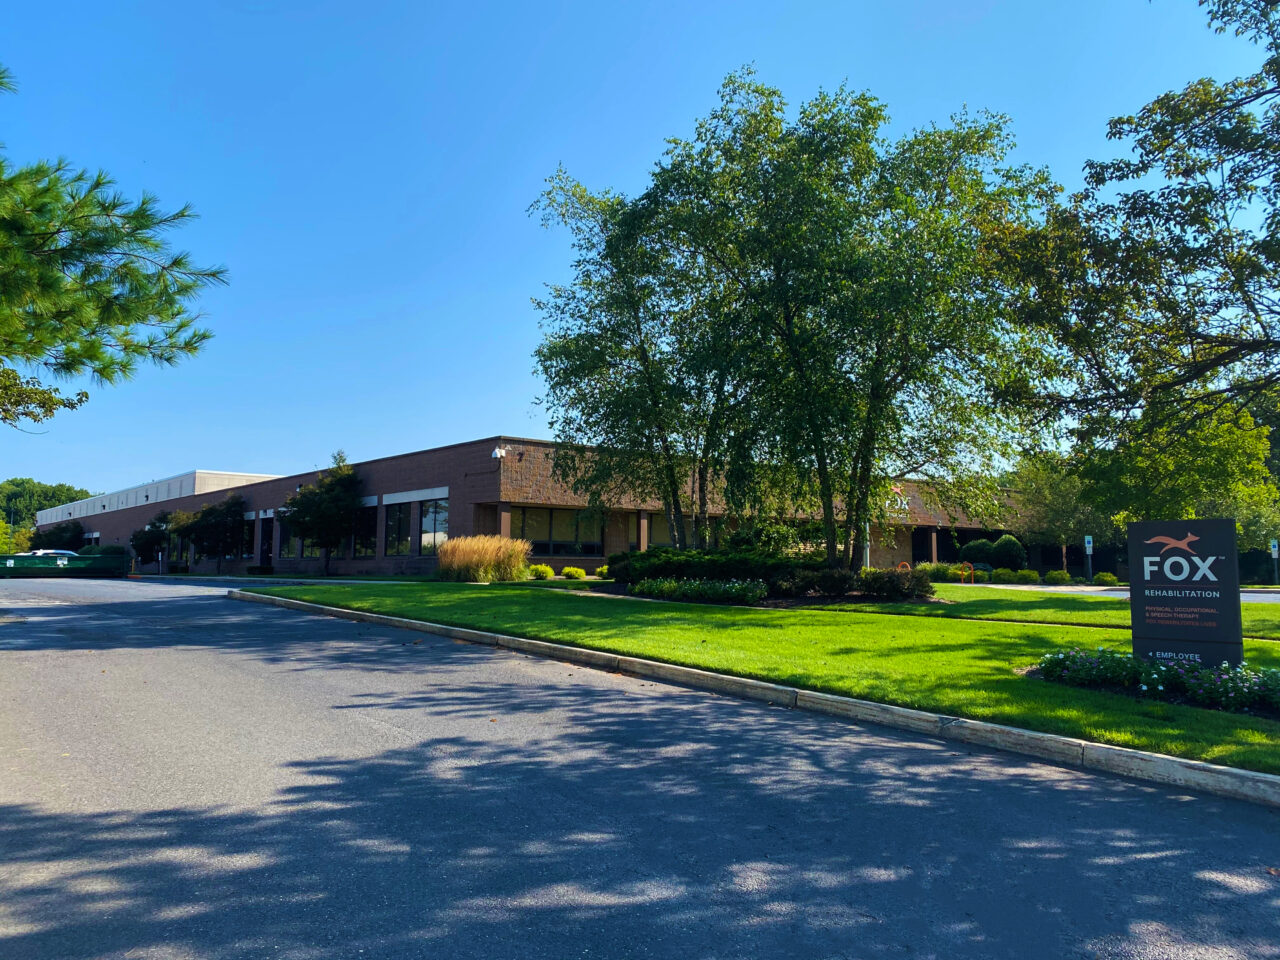 PREMIER CHERRY HILL OFFICE SPACE AVAILABLE